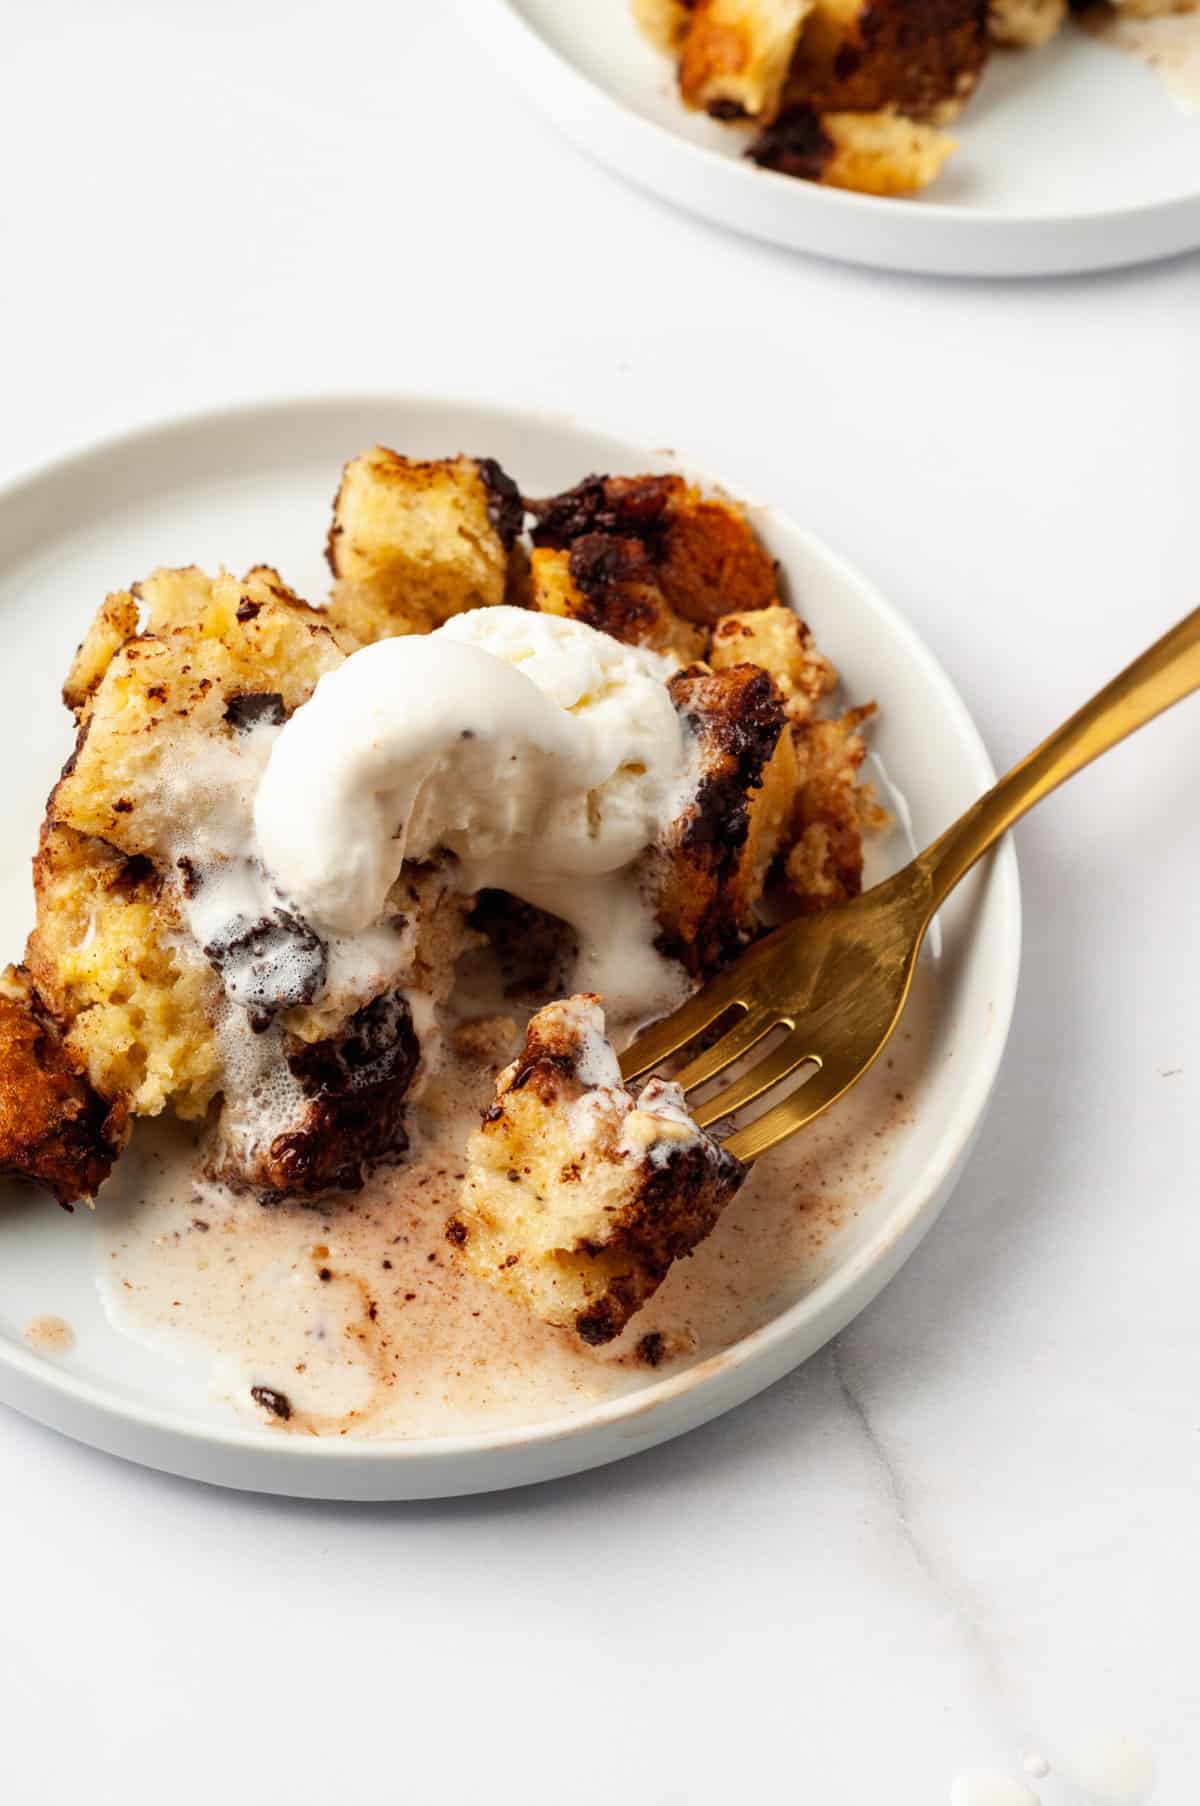 serving of chocolate chip bread pudding made from a slow cooker served on a white round plate with a gold fork